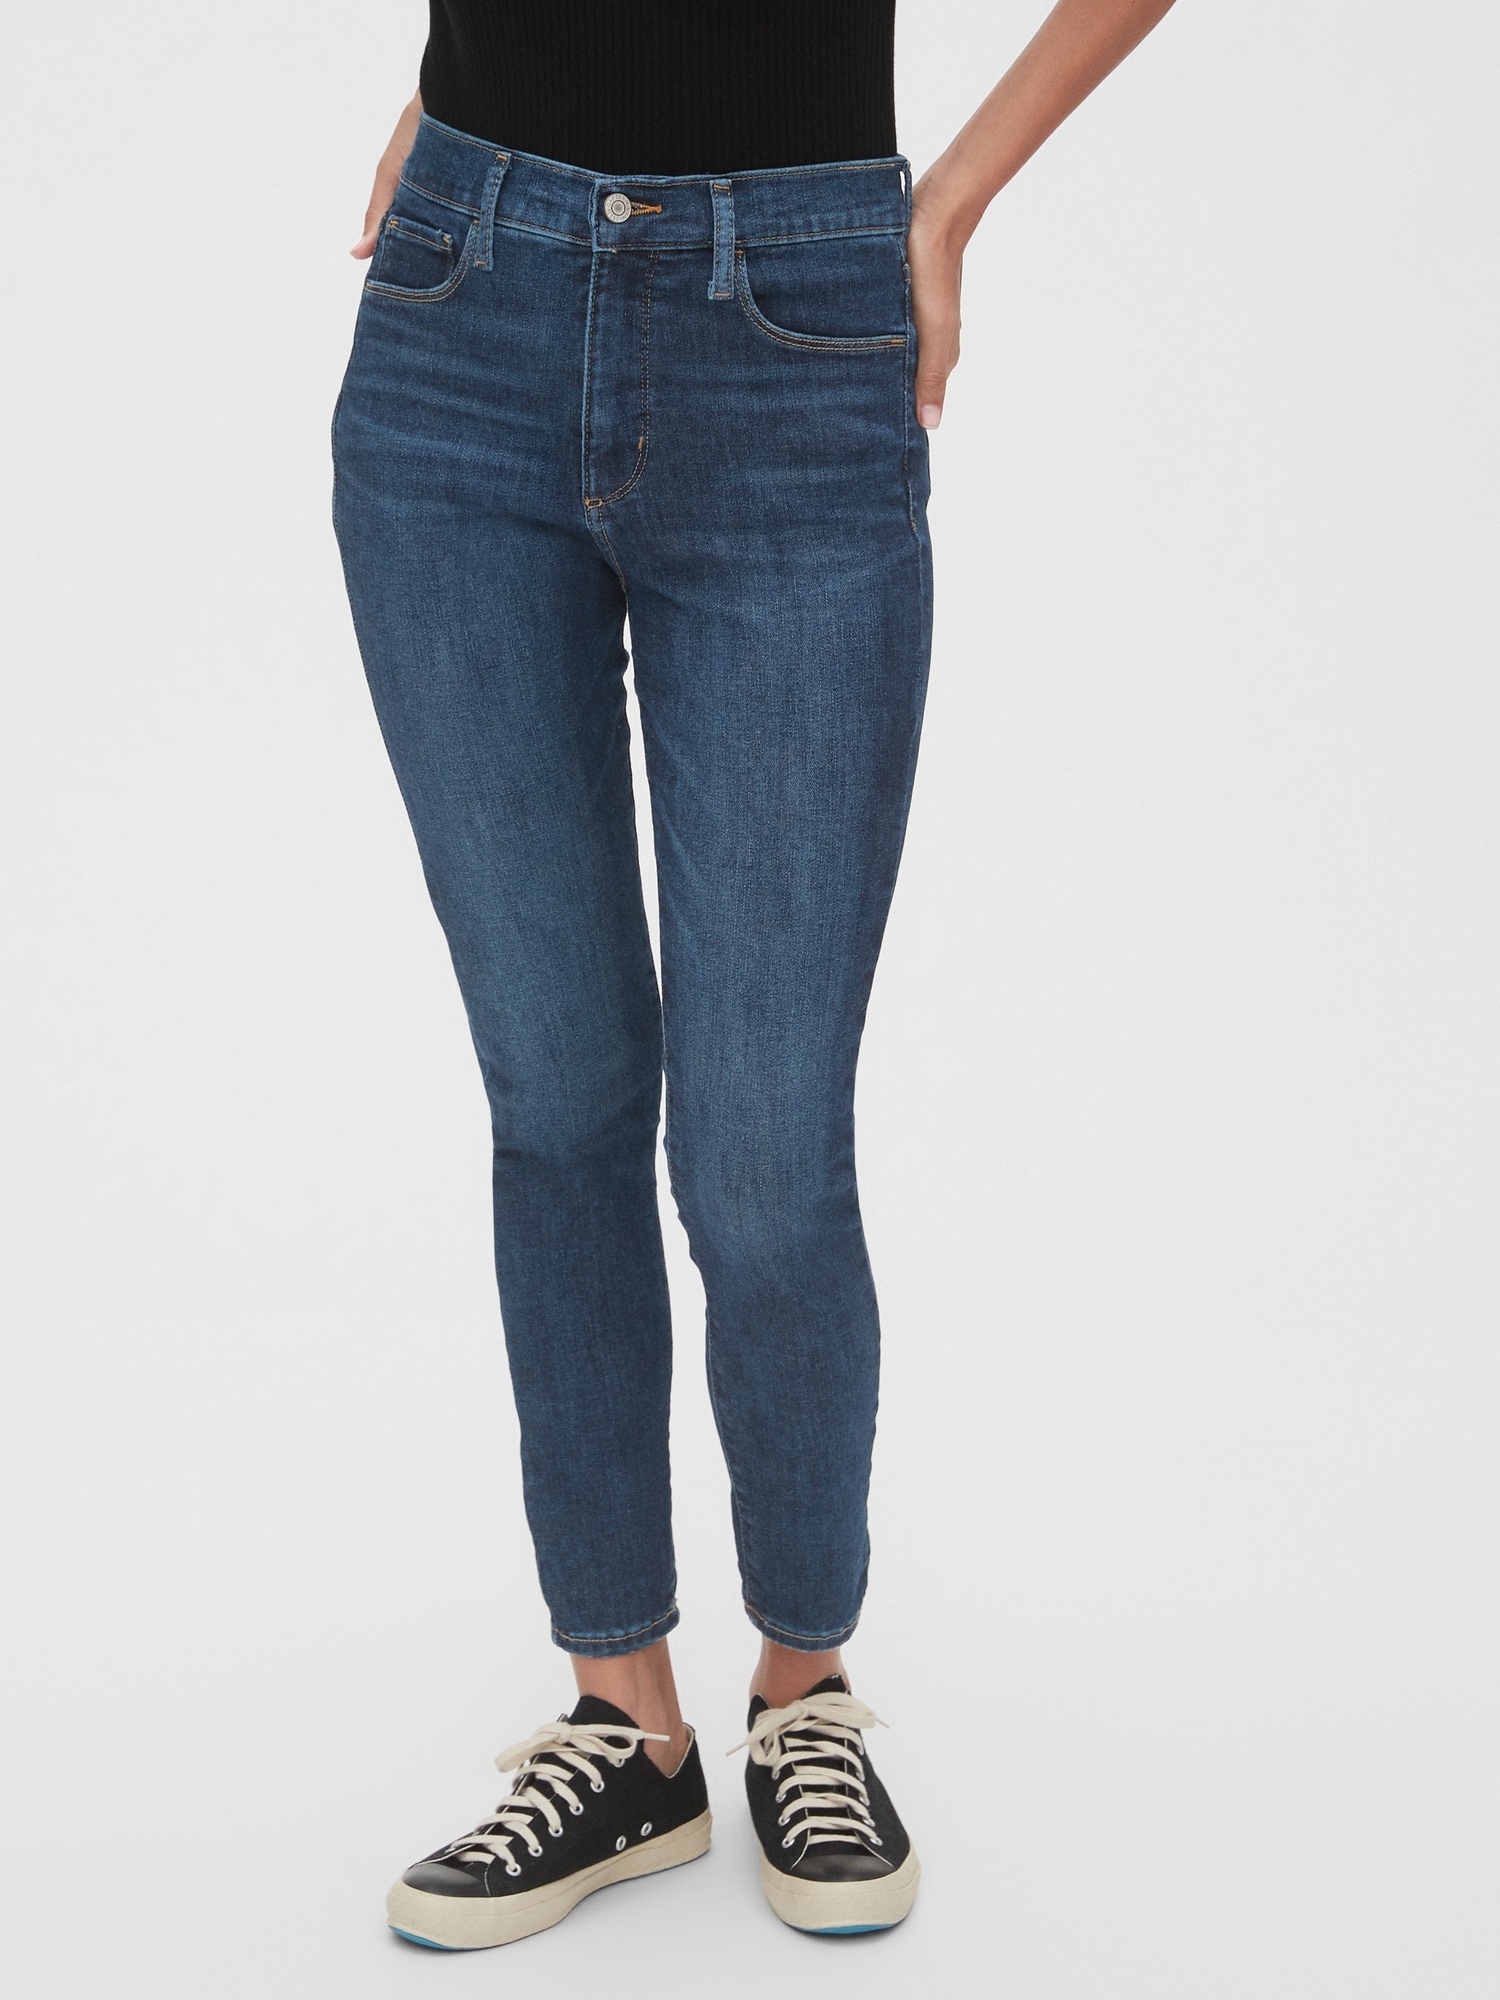 the jegging jeans